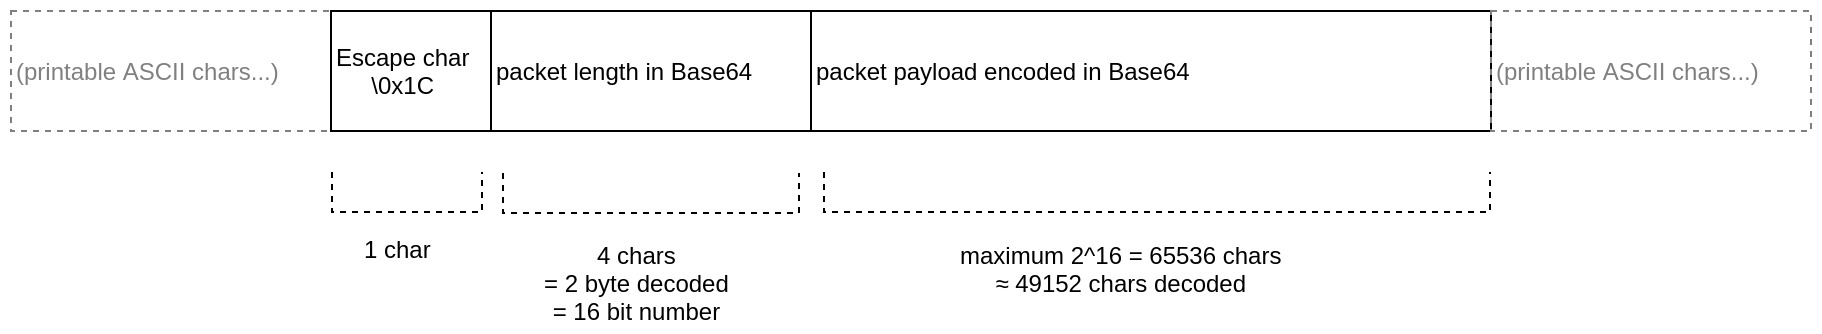 libspt packet layout